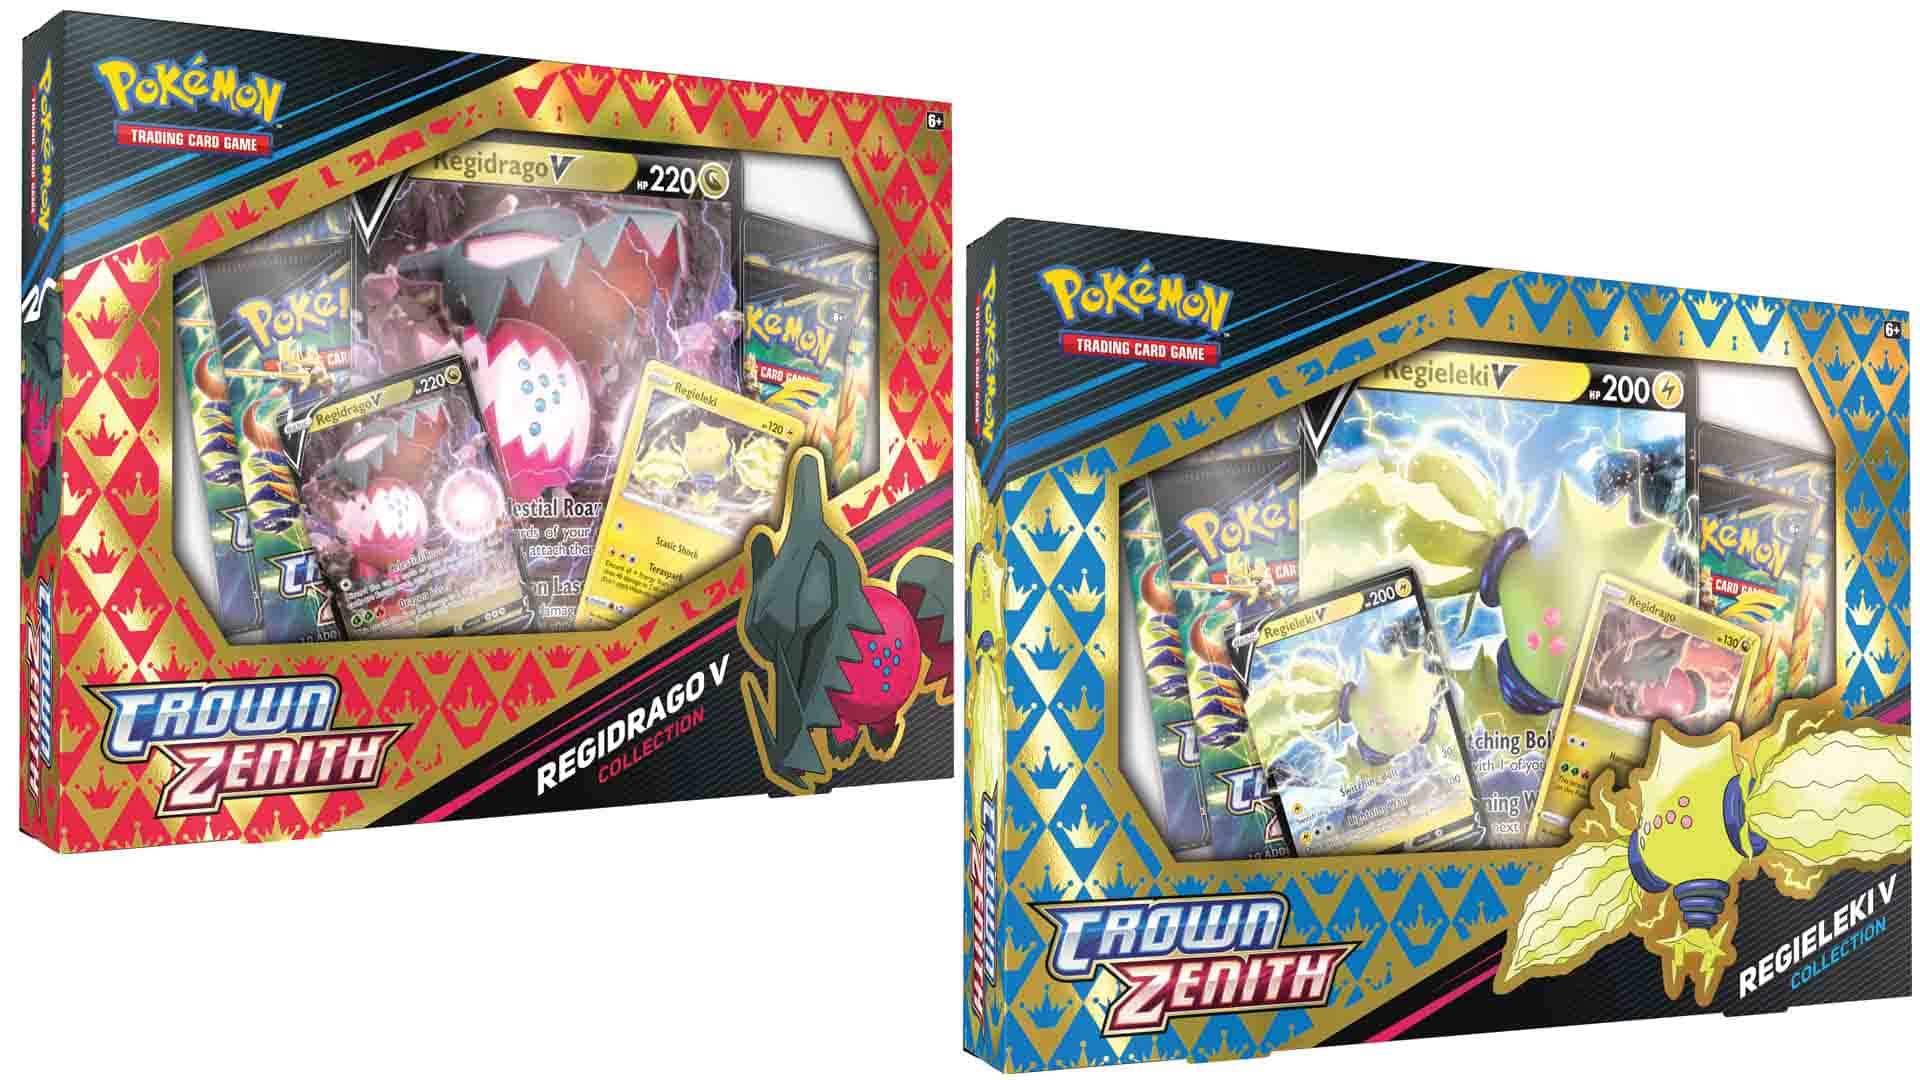 Pokémon TCG Crown Zenith setlist – what cards are in the new expansion?